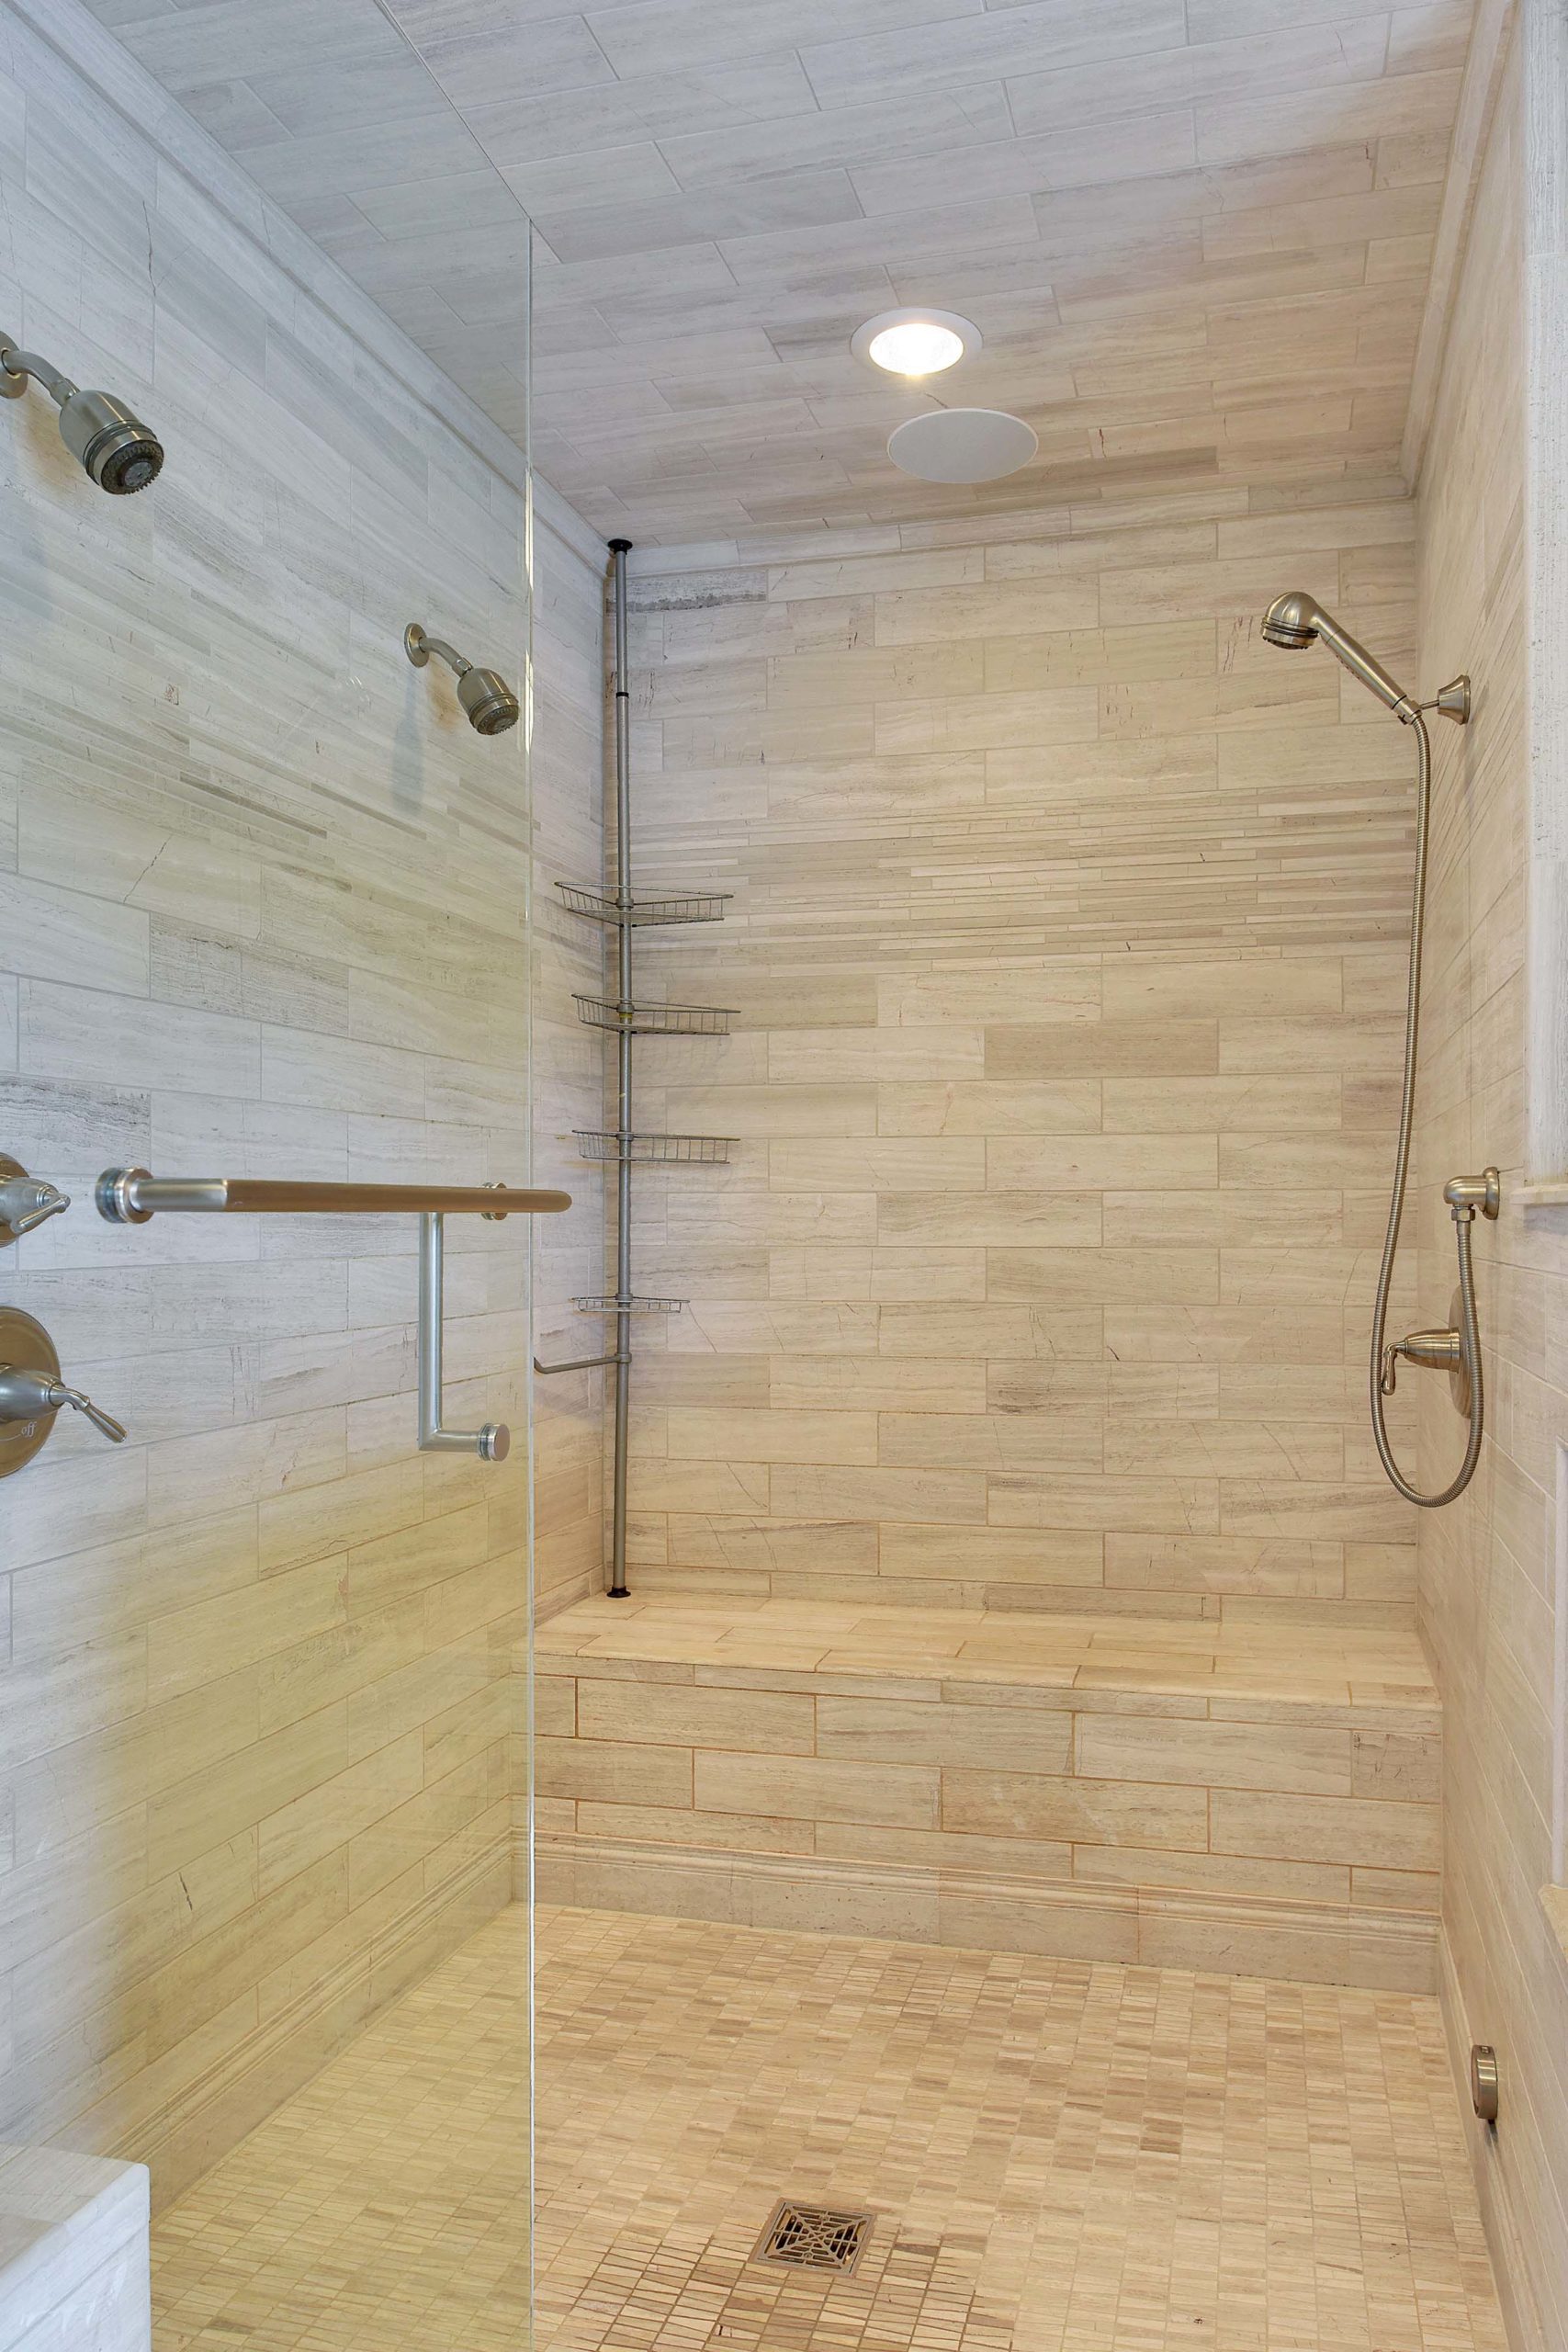 A contemporary bathroom with a glass shower and a bench.